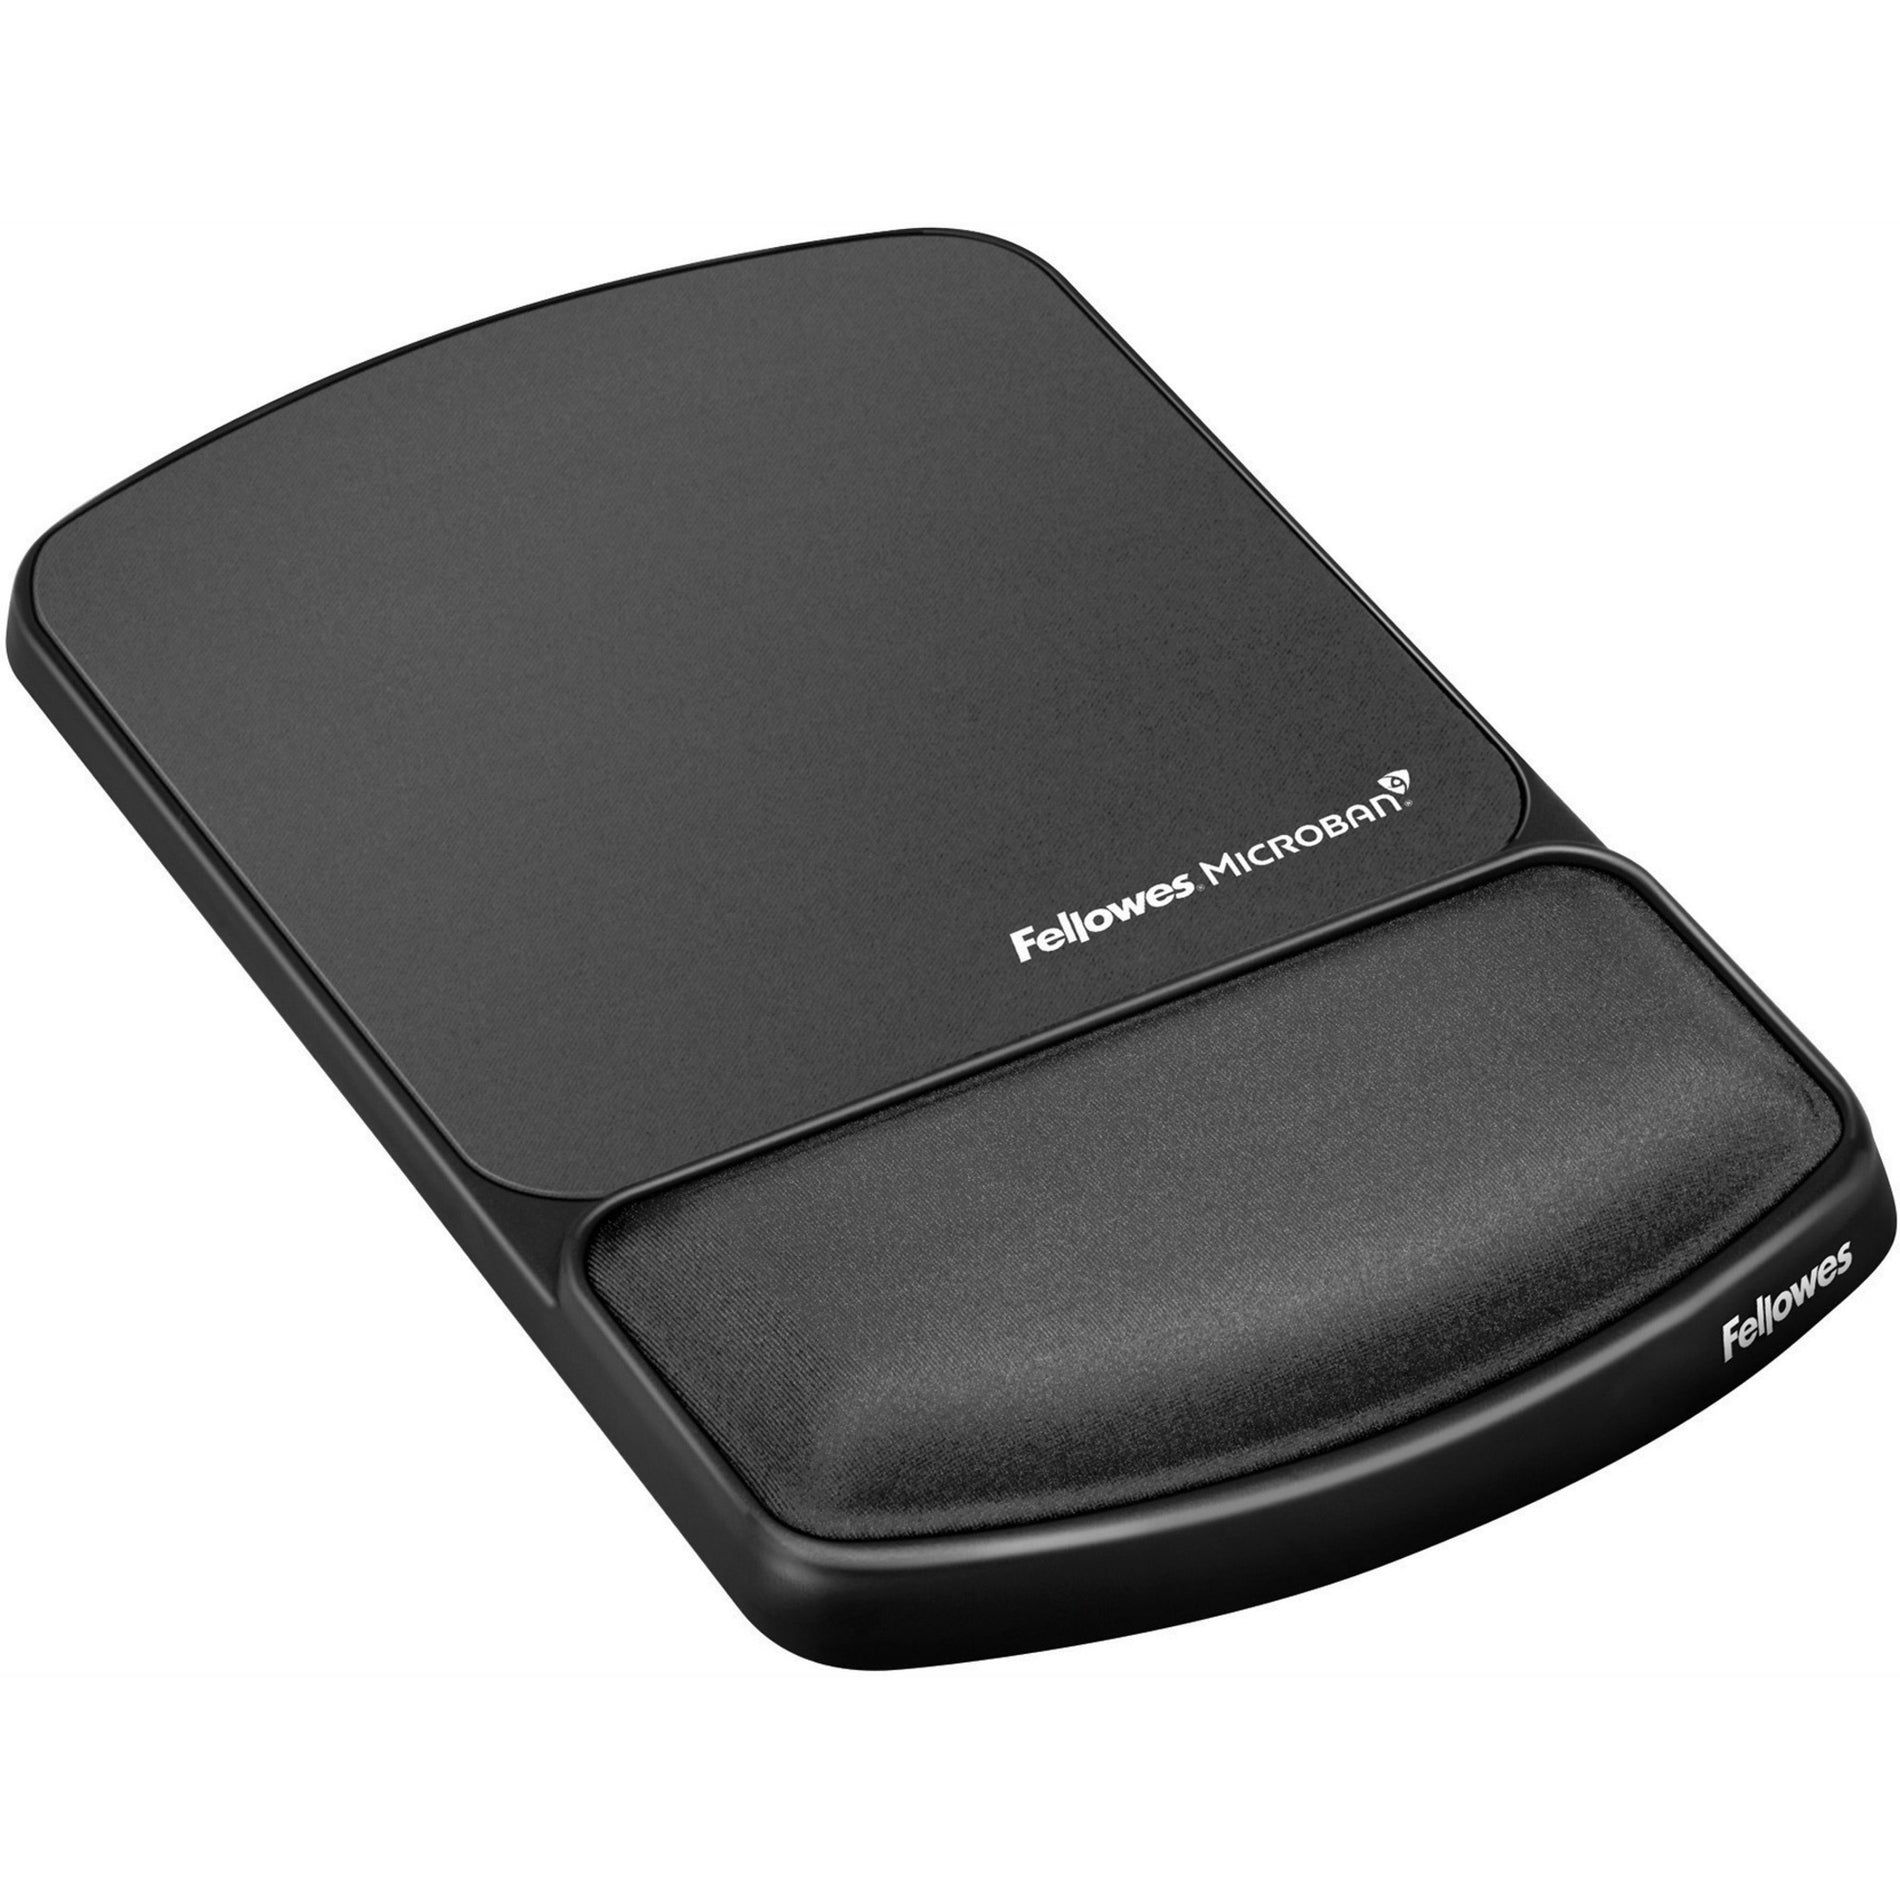 Fellowes 9175101 Mouse Pad / Wrist Support with Microban Protection, Soft, Comfortable, Non-skid, Durable, Antimicrobial, Pressure Reliever, Ergonomic, Fatigue-free